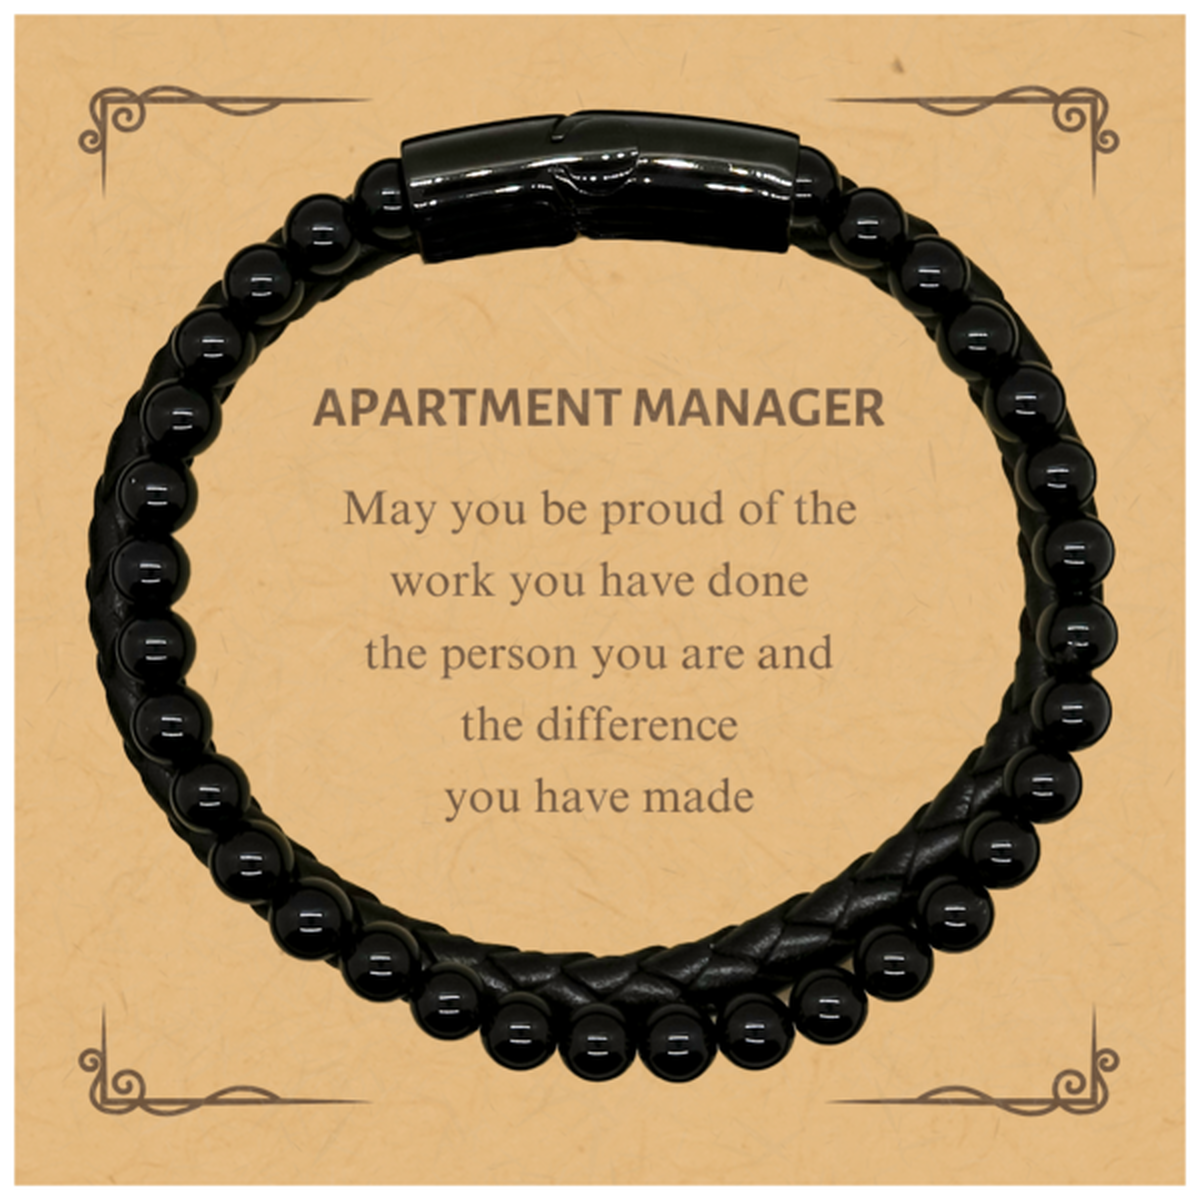 Apartment Manager May you be proud of the work you have done, Retirement Apartment Manager Stone Leather Bracelets for Colleague Appreciation Gifts Amazing for Apartment Manager